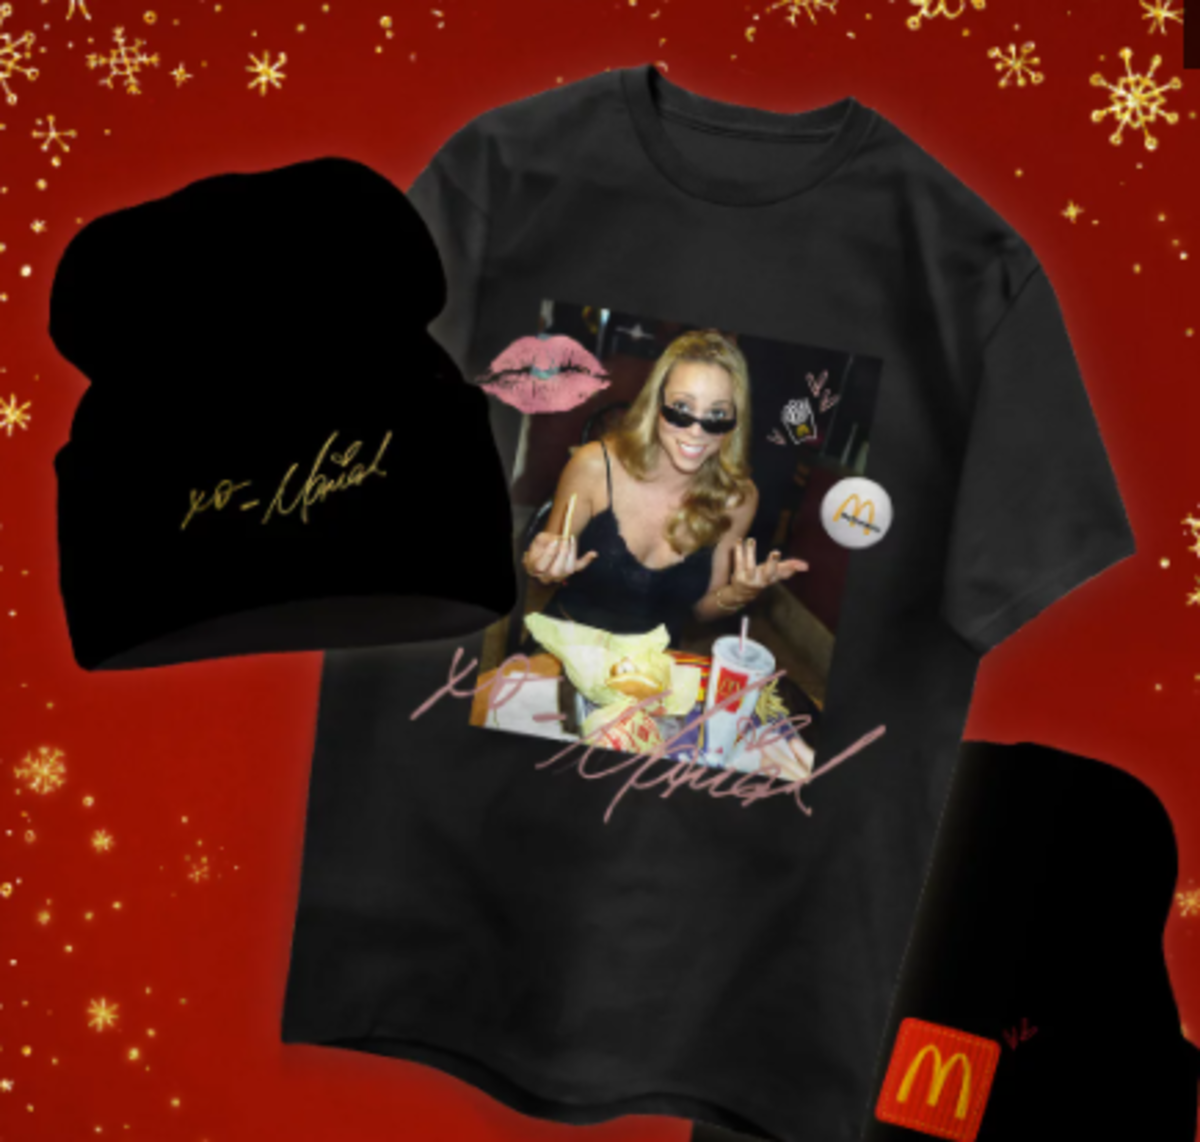 mcdonalds-giving-away-free-food-until-christmas-eve-paid-for-by-mariah-carey